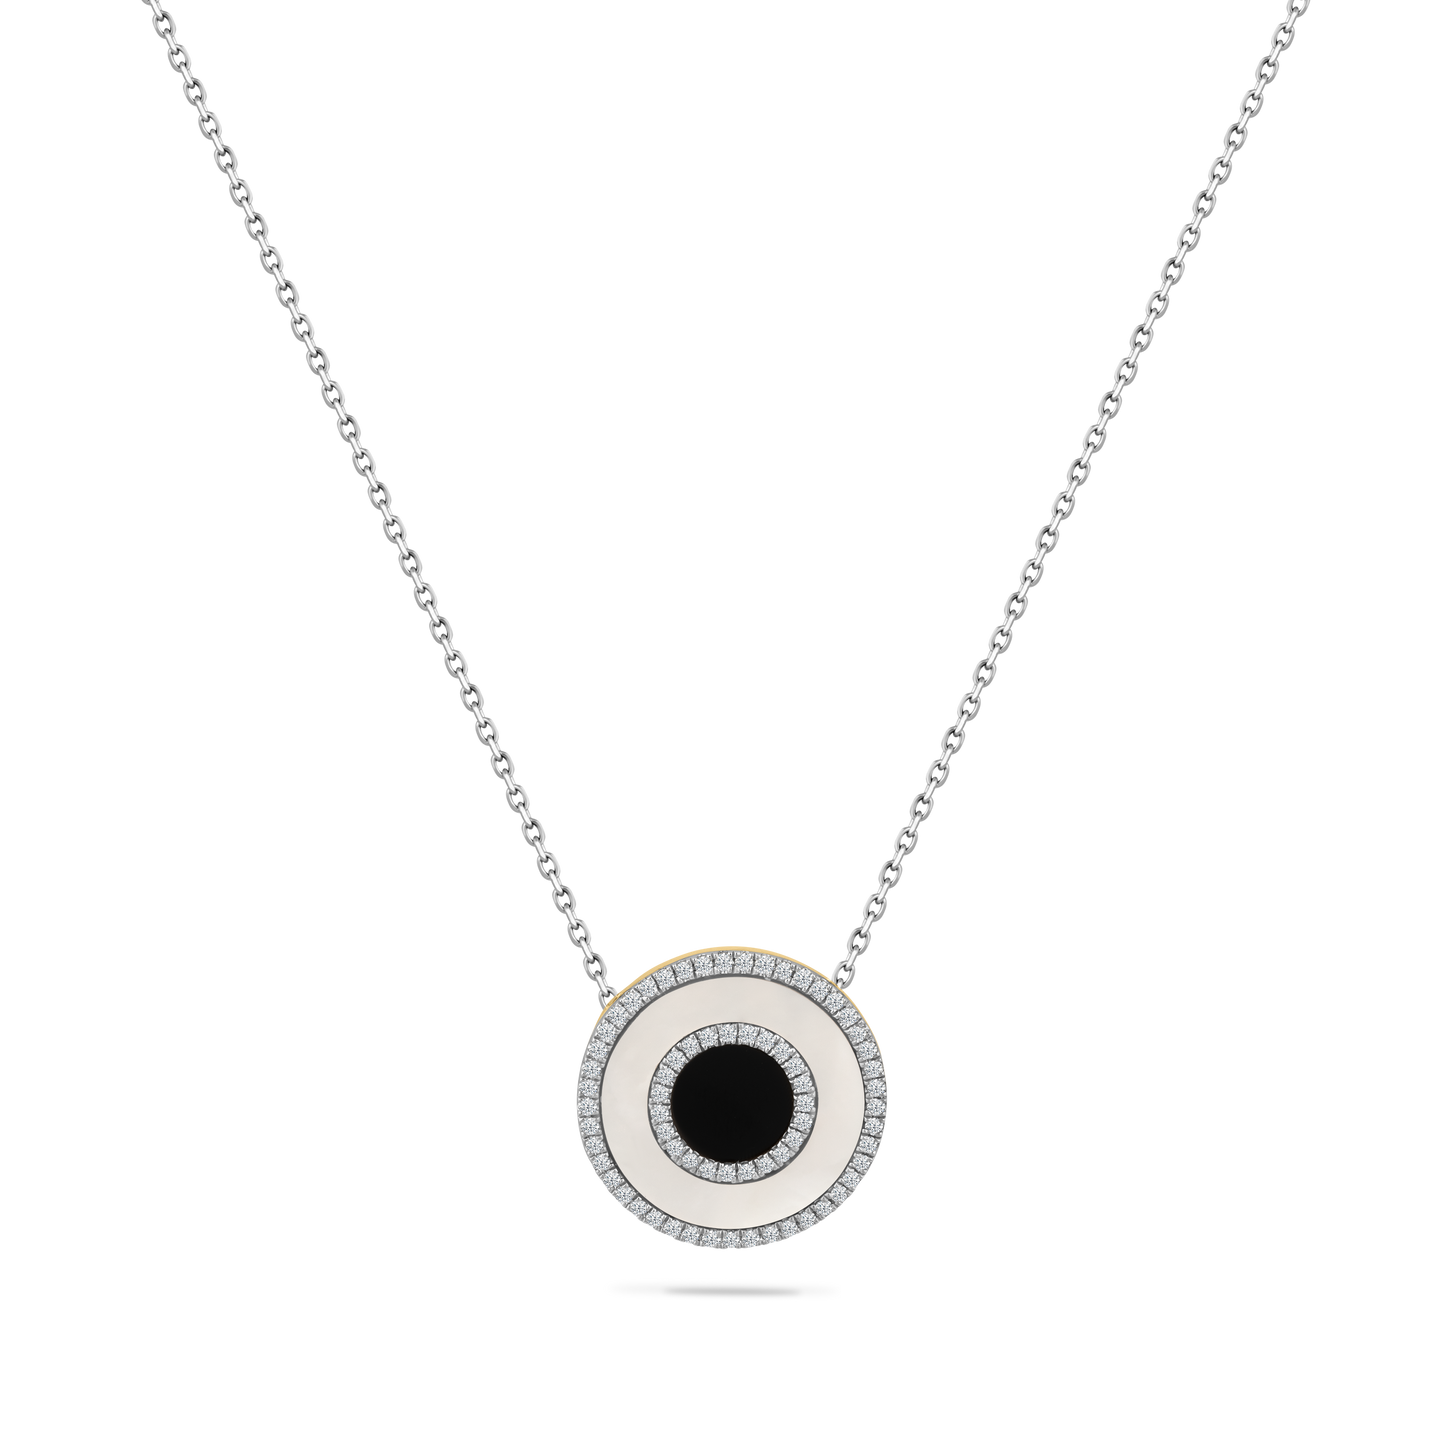 14K DISK PENDANT WITH MOTHER OF PEARL, BLACK ONYX  & 68 DIAMONDS 0.23CT ON 18 INCHES CHAIN